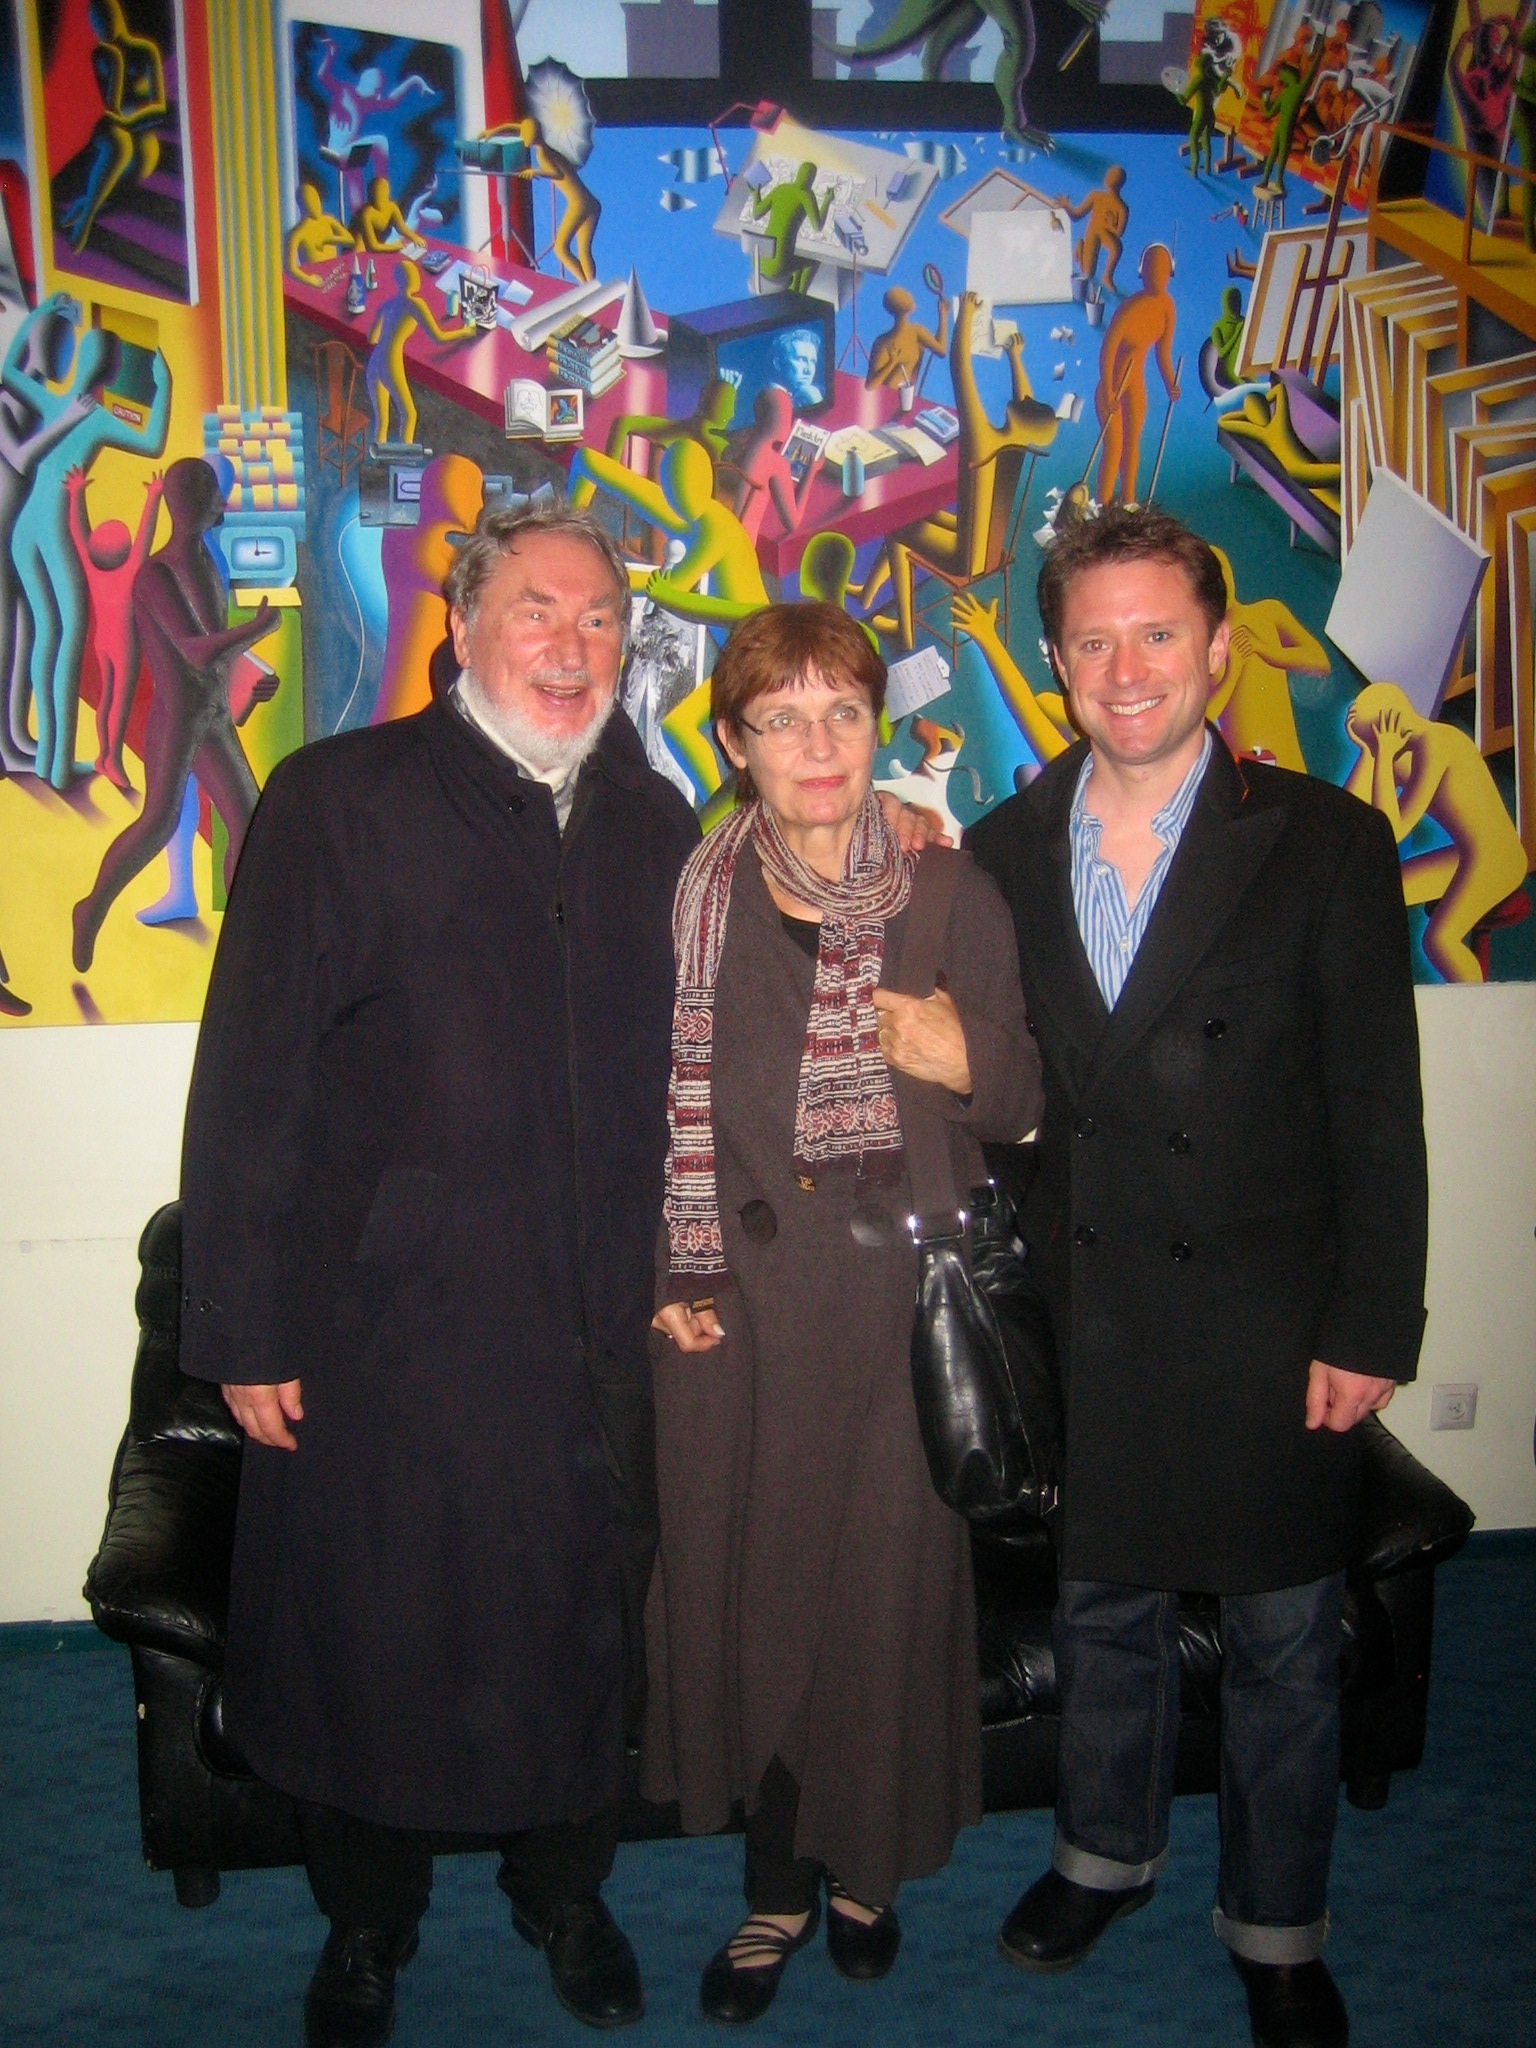 With Mr and Mrs HK Gruber in Estonia in October 2011. Wonderrrrrrful!